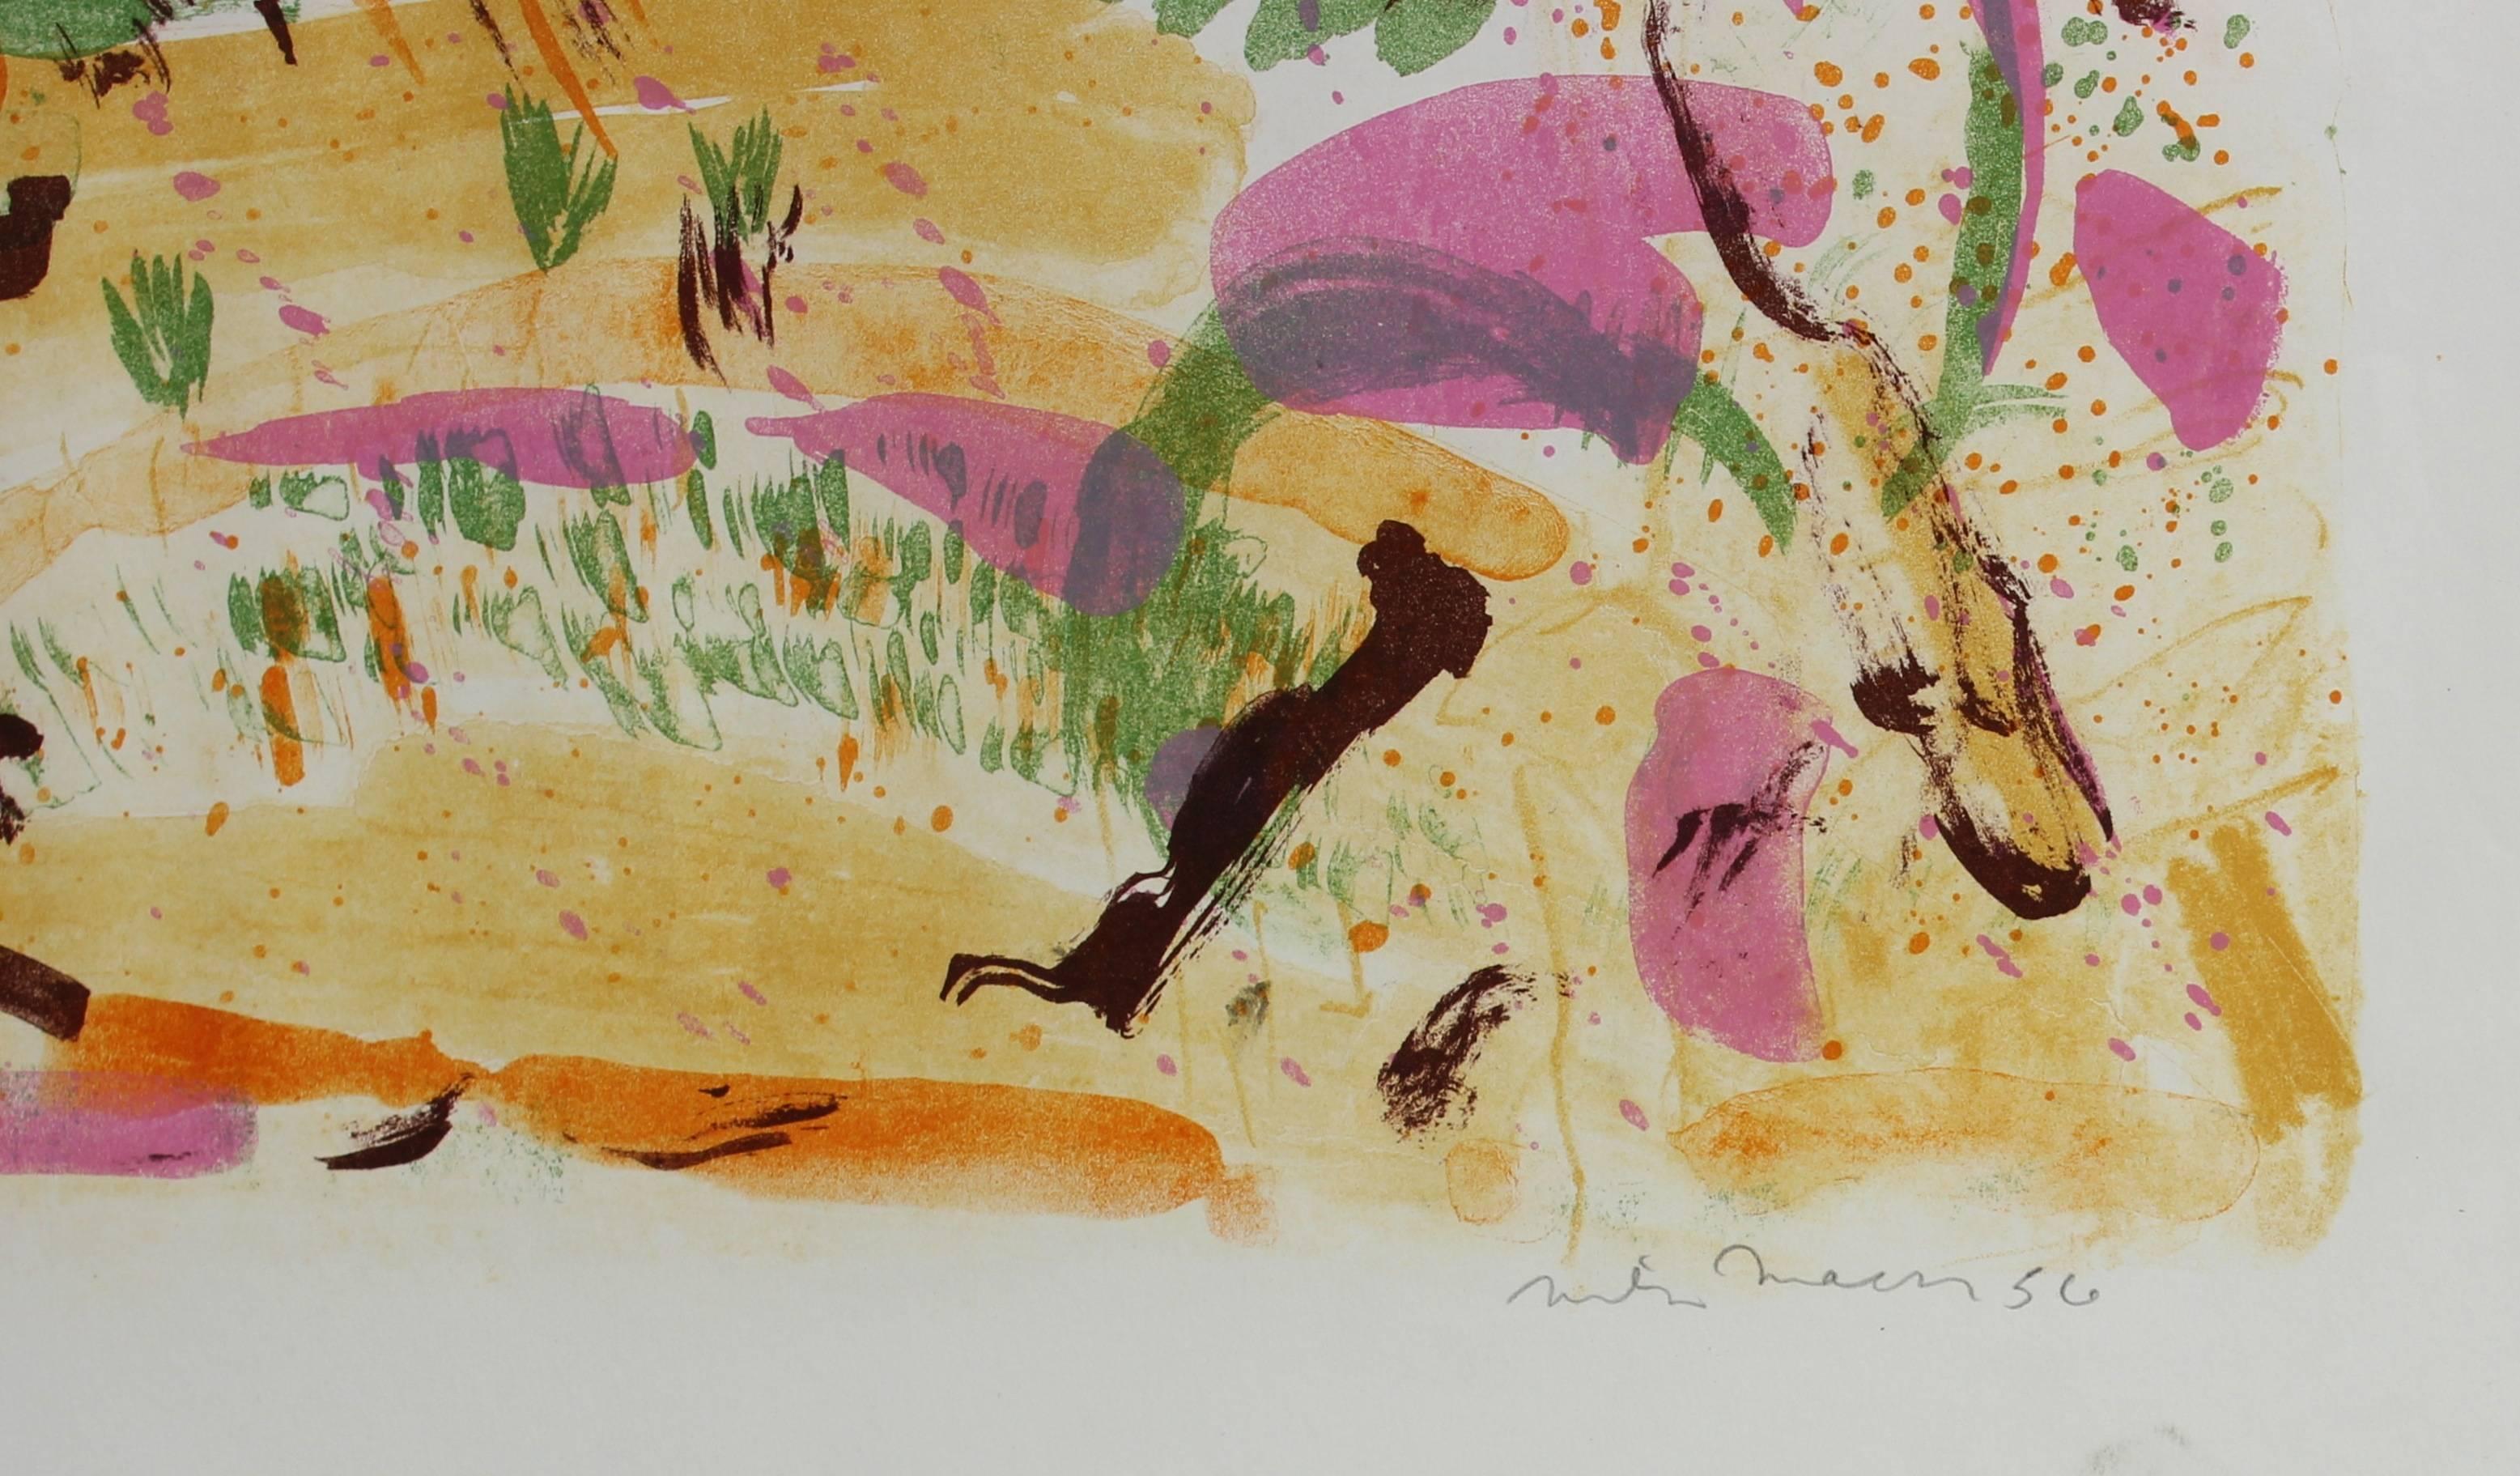 Bright Abstracted Springtime Landscape Lithograph, 1956 - Modern Print by Michael L. Mason